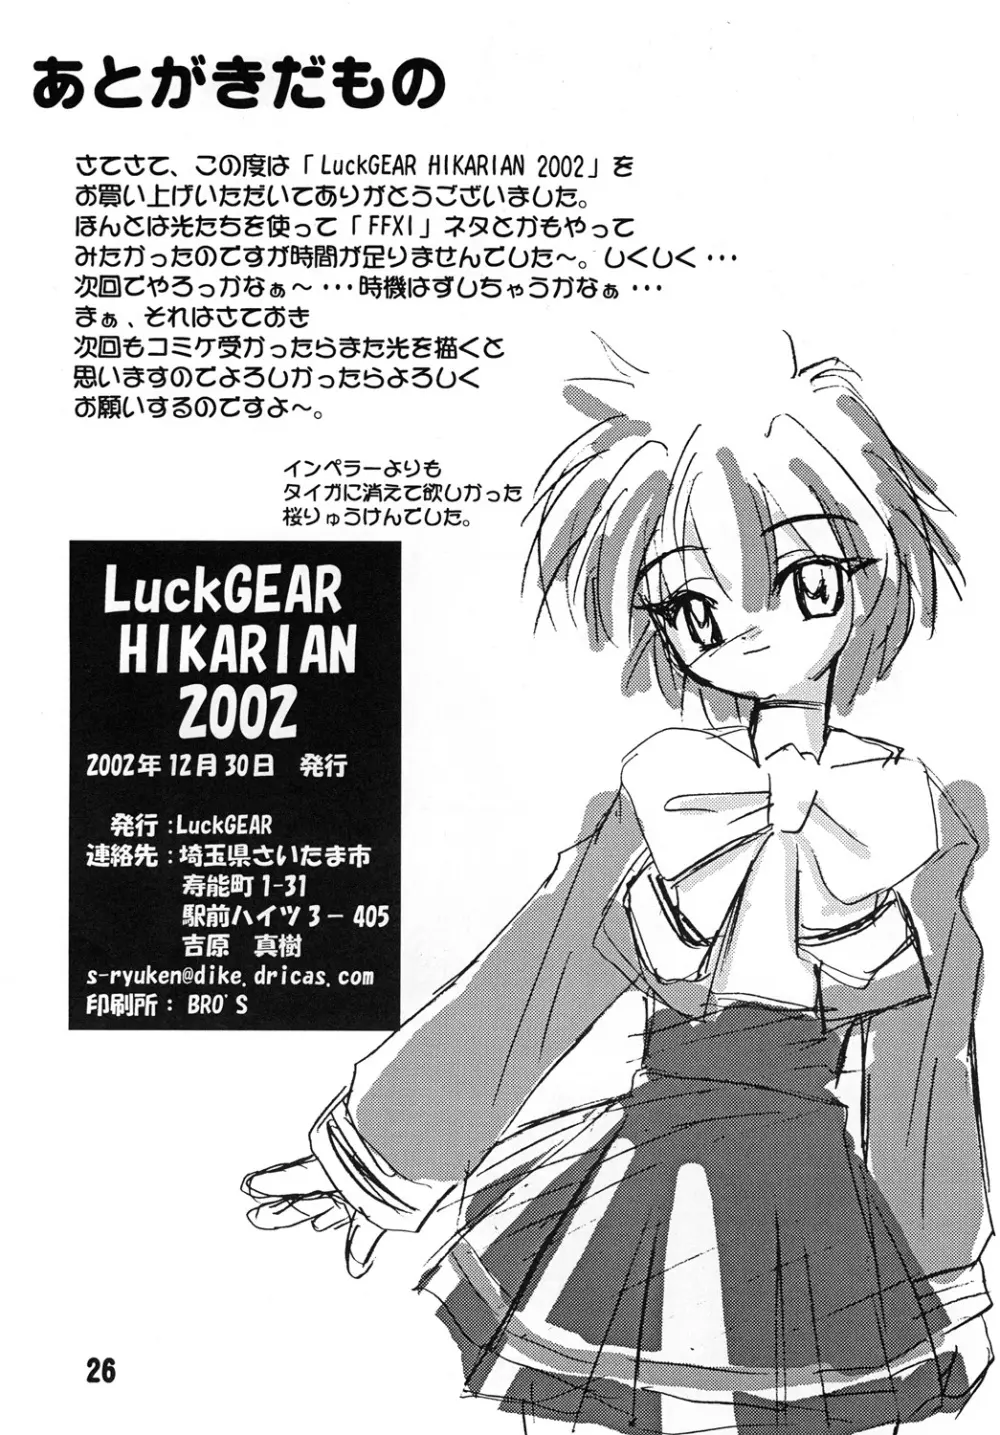 Luck GEAR Collection 1999-2005 124ページ